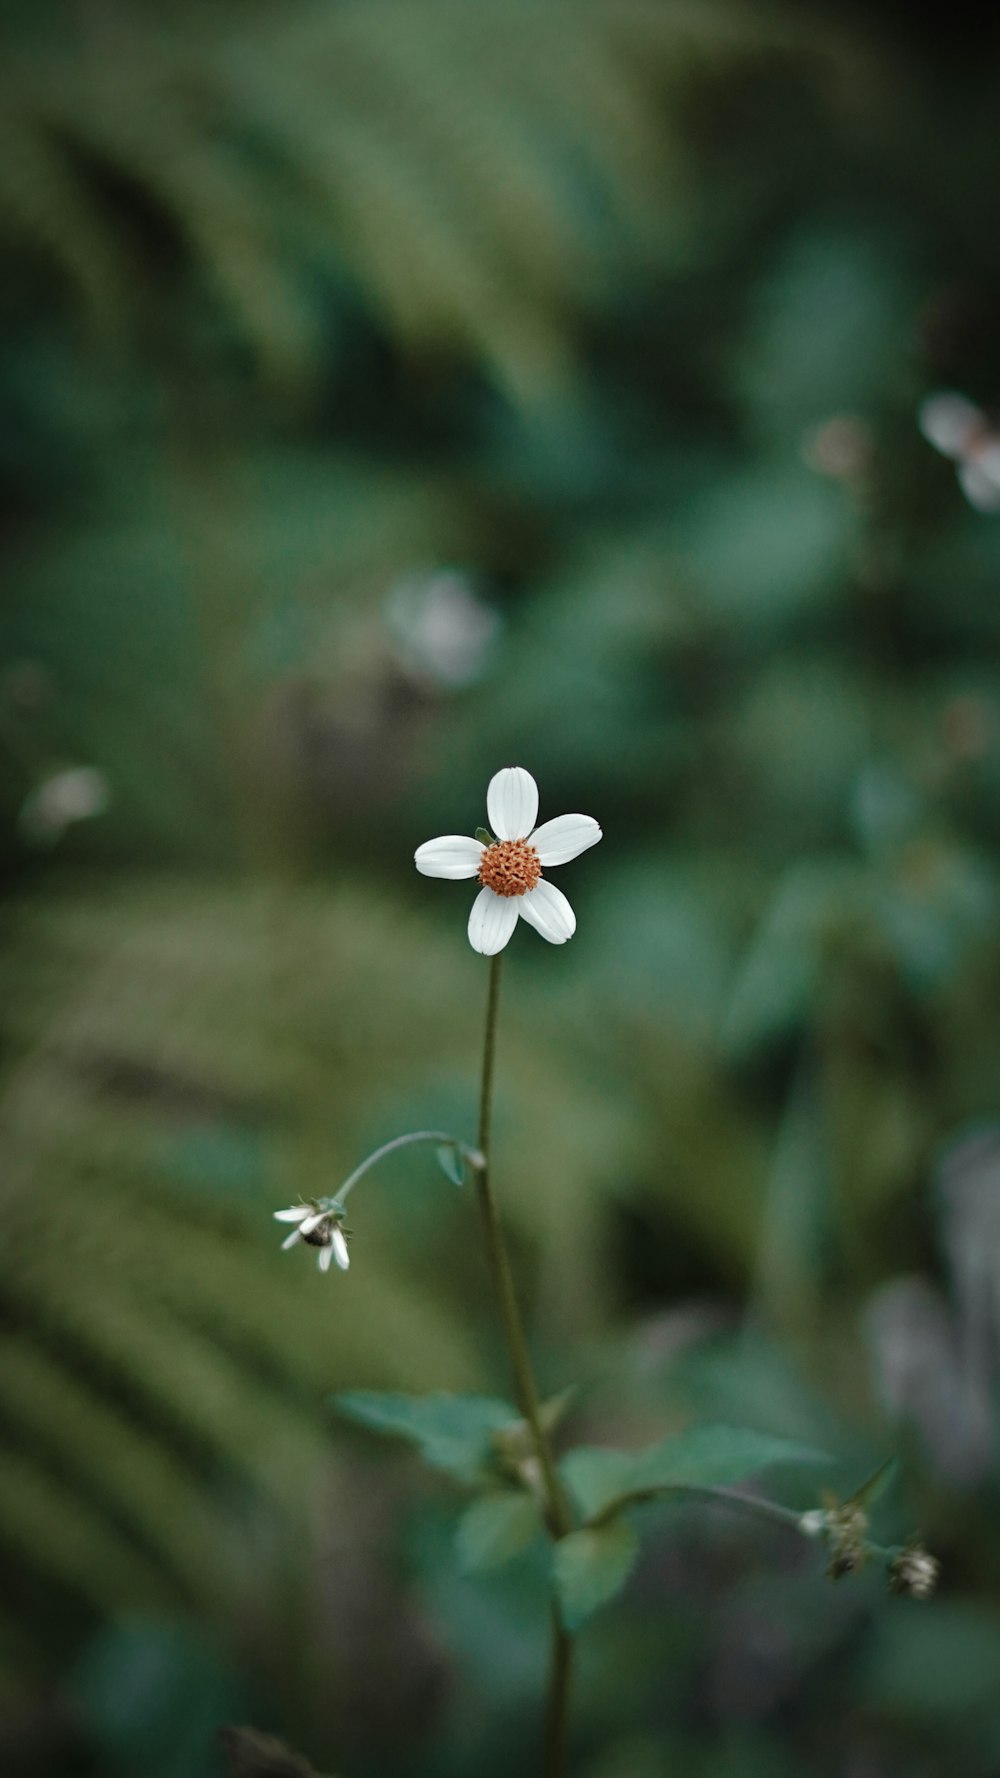 a small white flower with a red center